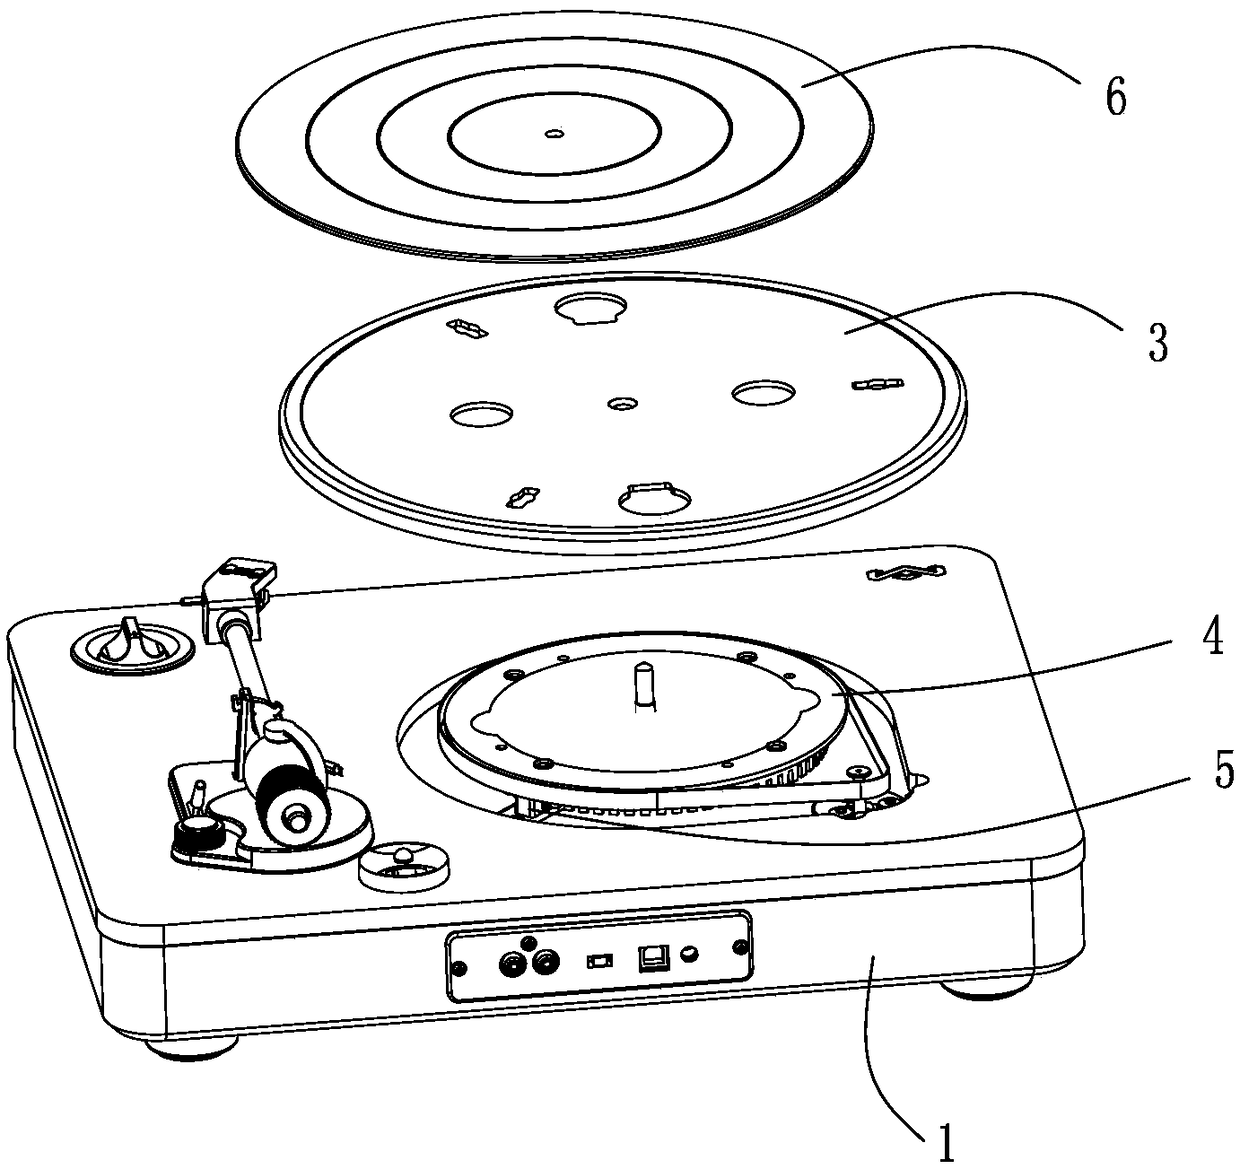 A record player convenient for speed measurement